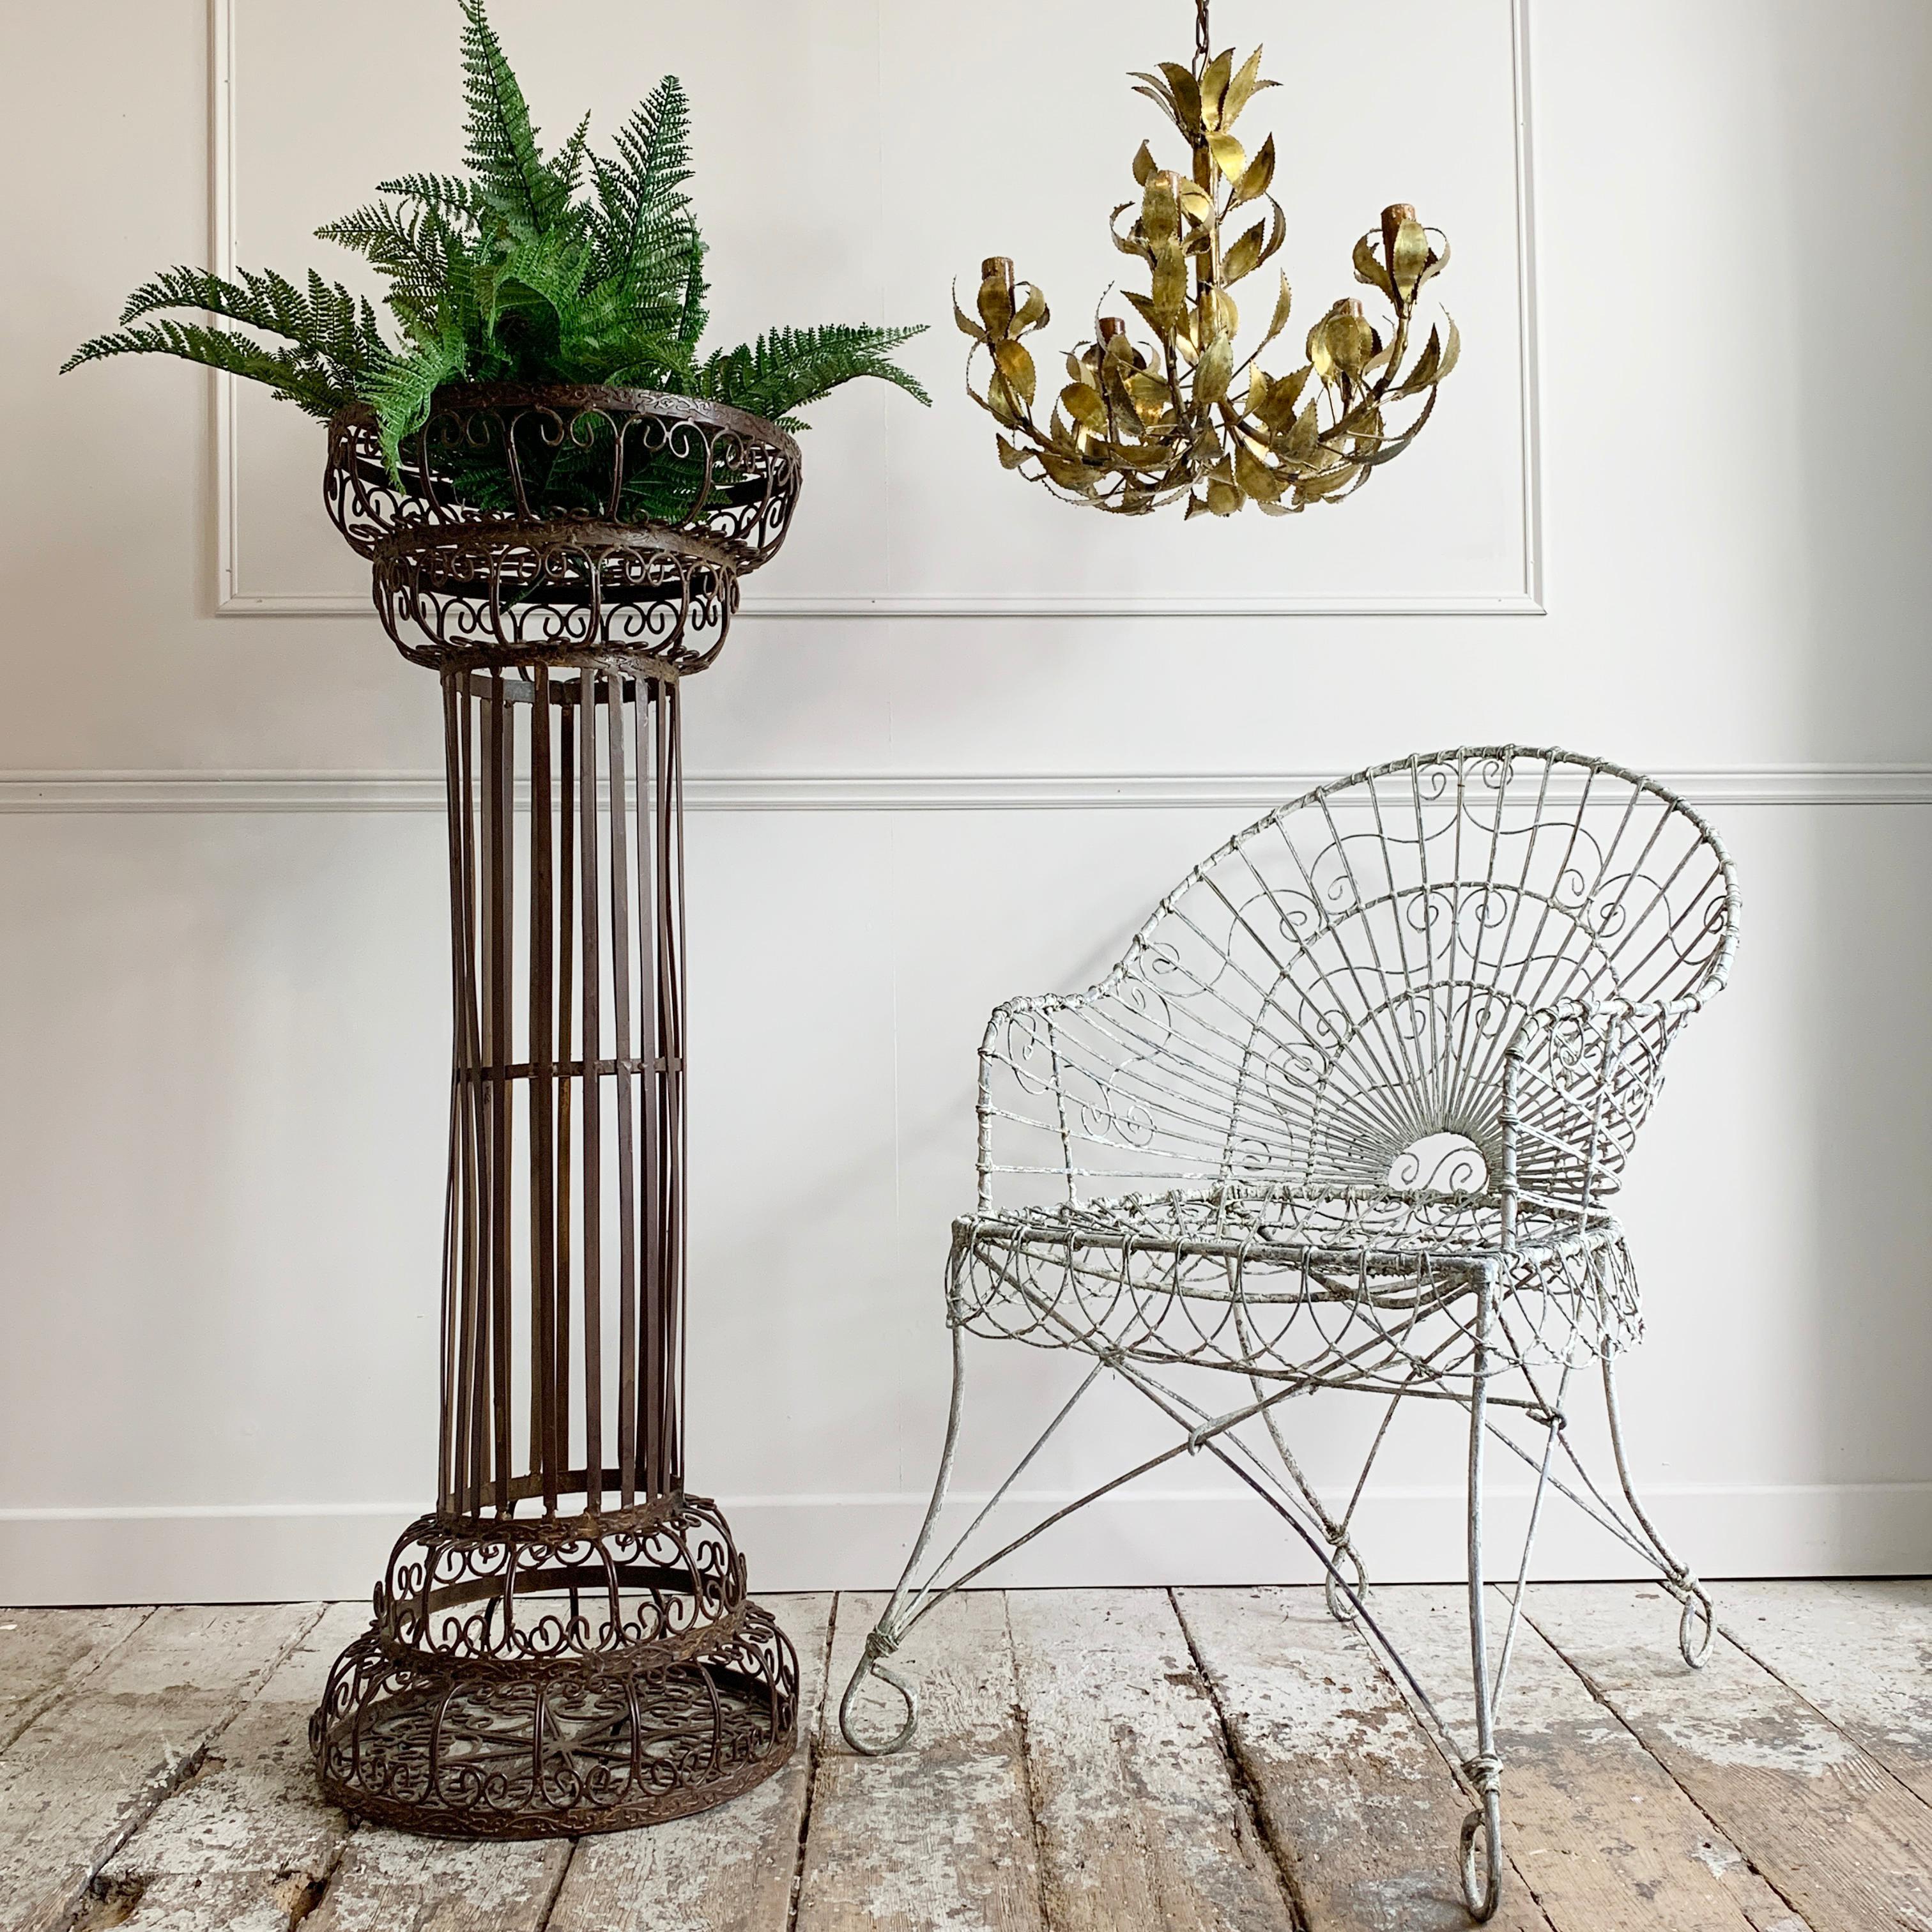 Mid century scrollwork plant stand
Dating Circa 1930-1950'S
Reeded column design straps with detailed scroll work detailing
A true statement piece for an entrance hall or garden
Brown tone in colour
Measures: 111cm height, 39.5cm width top &